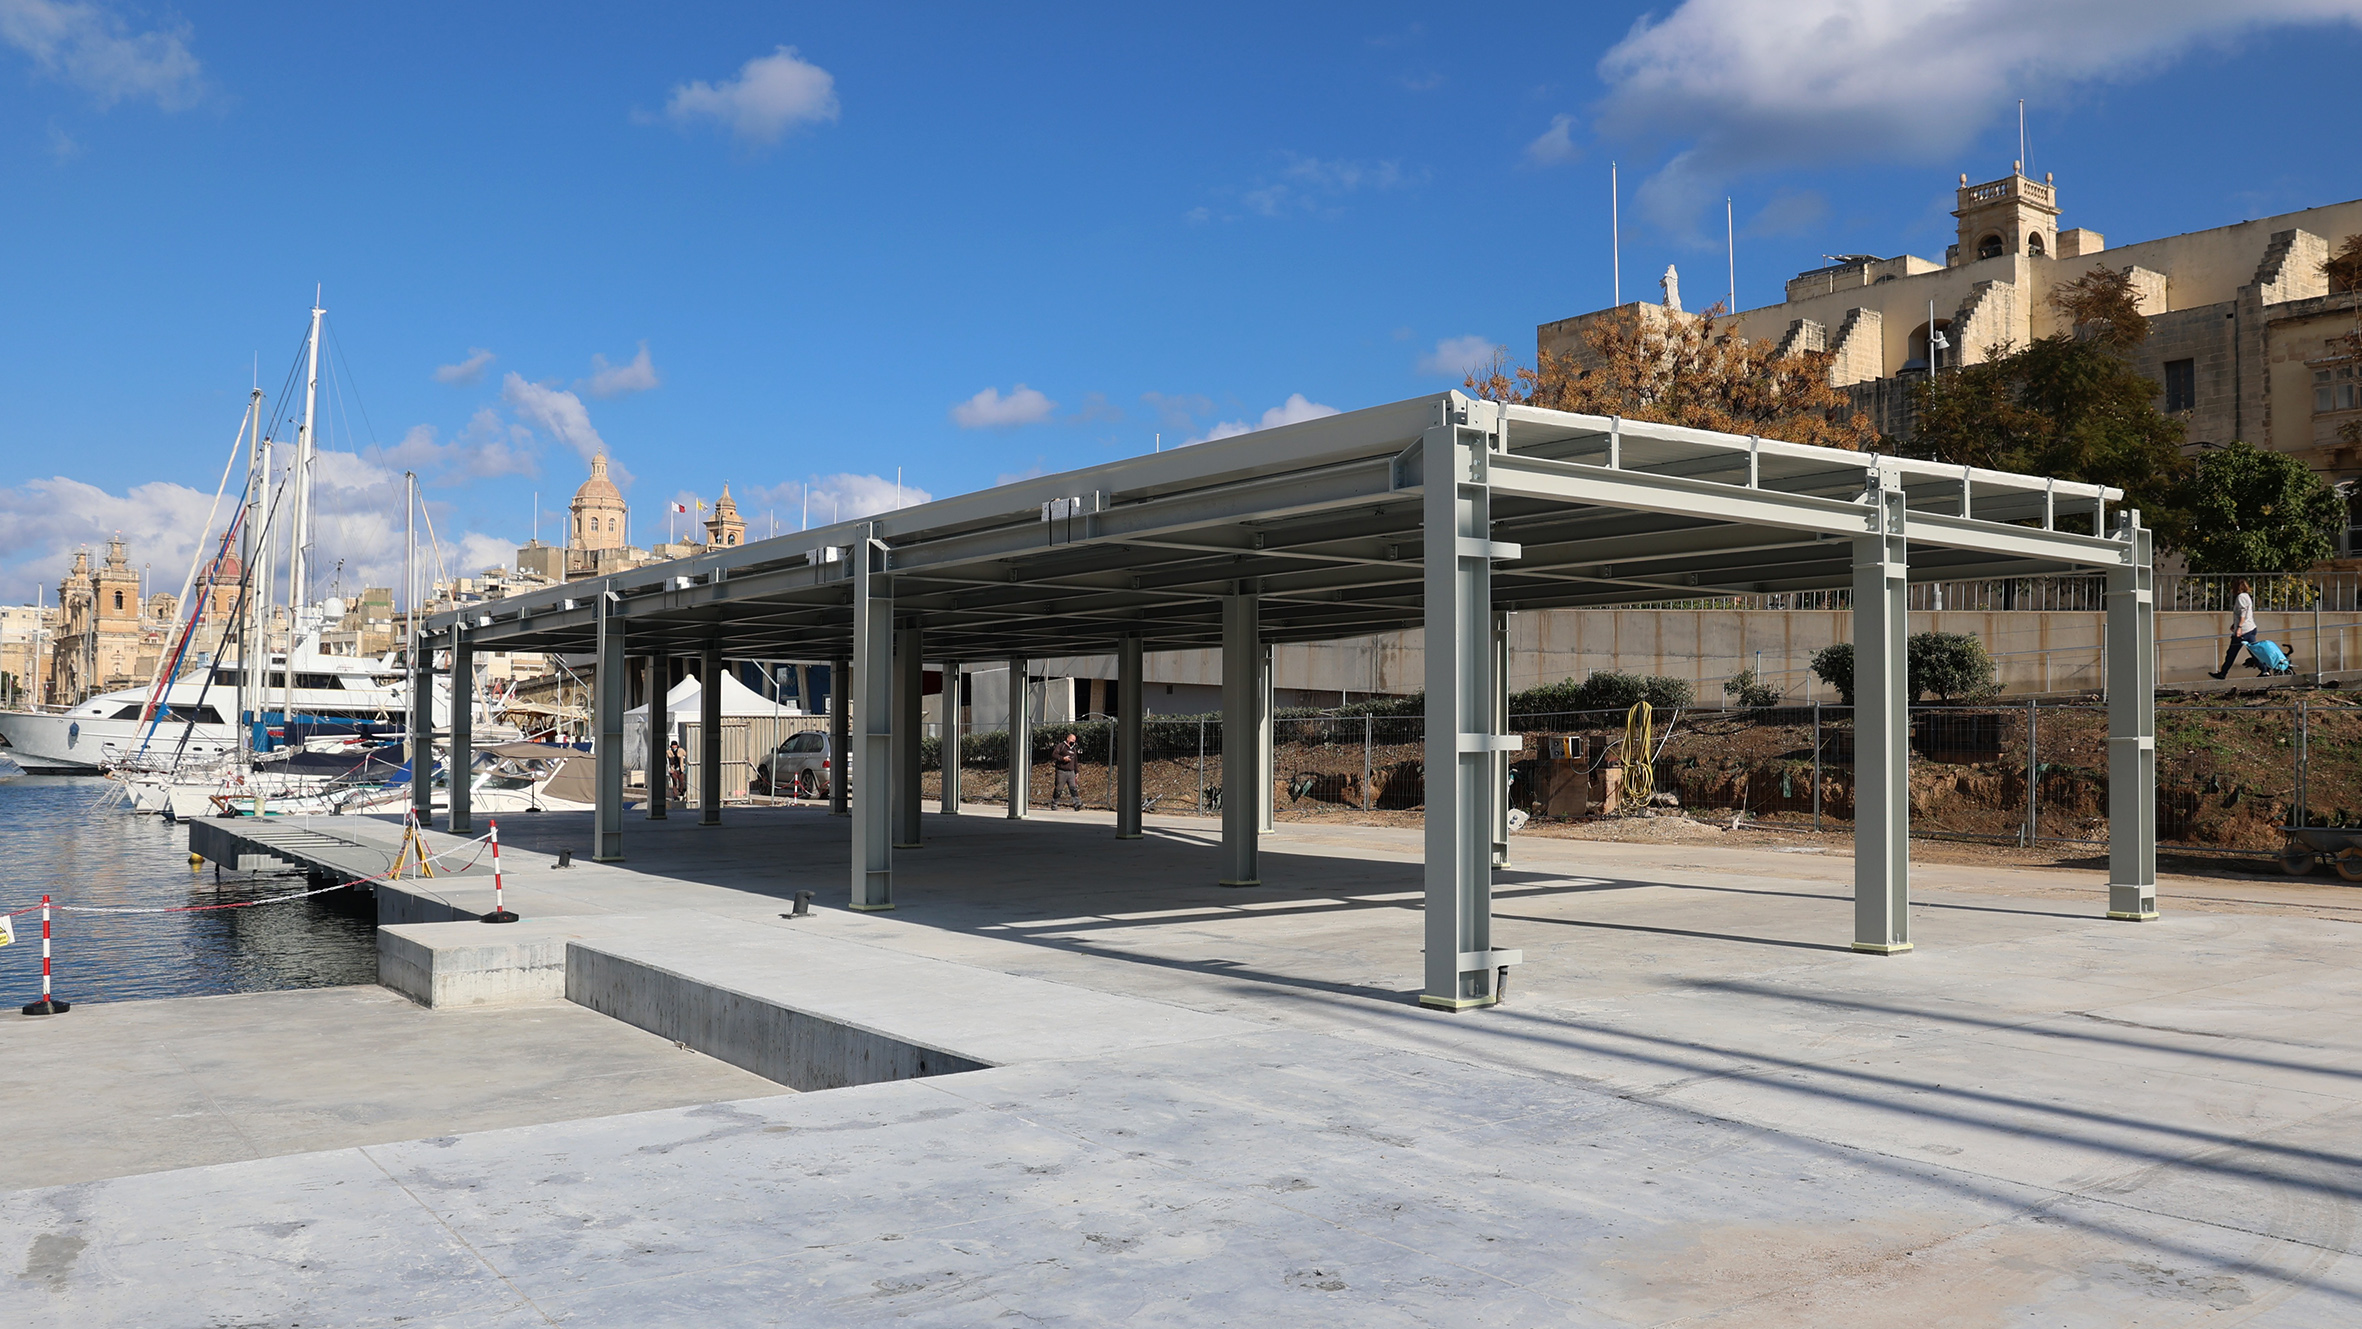 New Cospicua ferry landing facilities in first half of 2022